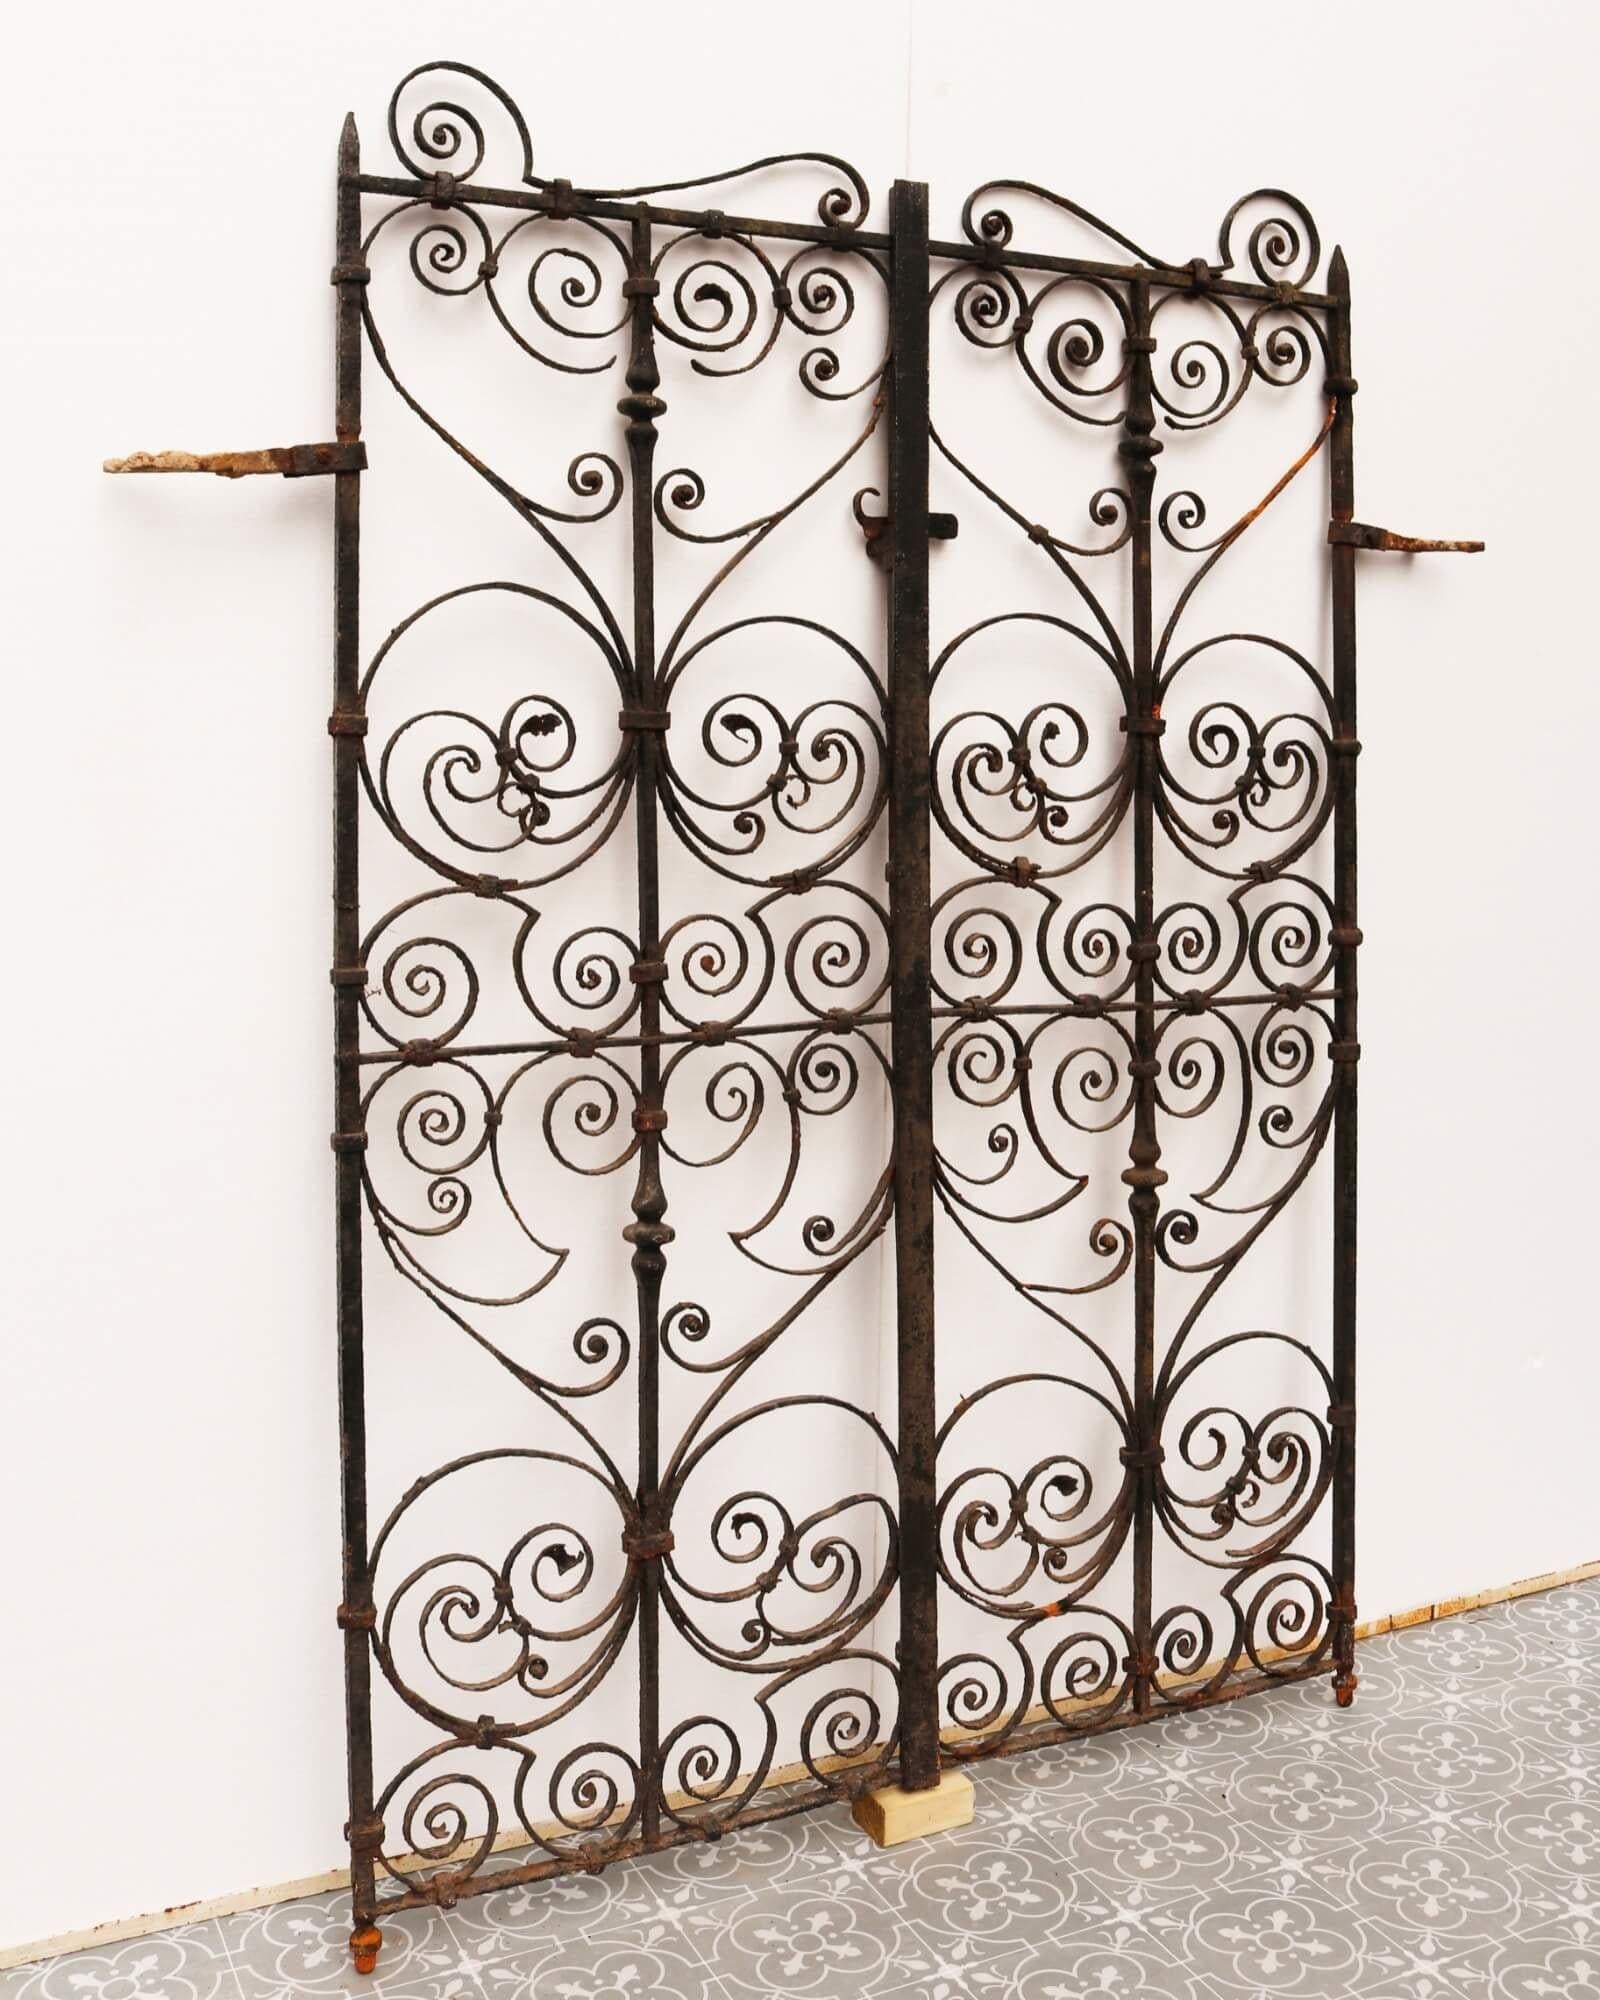 Set of Rare Georgian Wrought Iron Pedestrian Gates In Fair Condition For Sale In Wormelow, Herefordshire